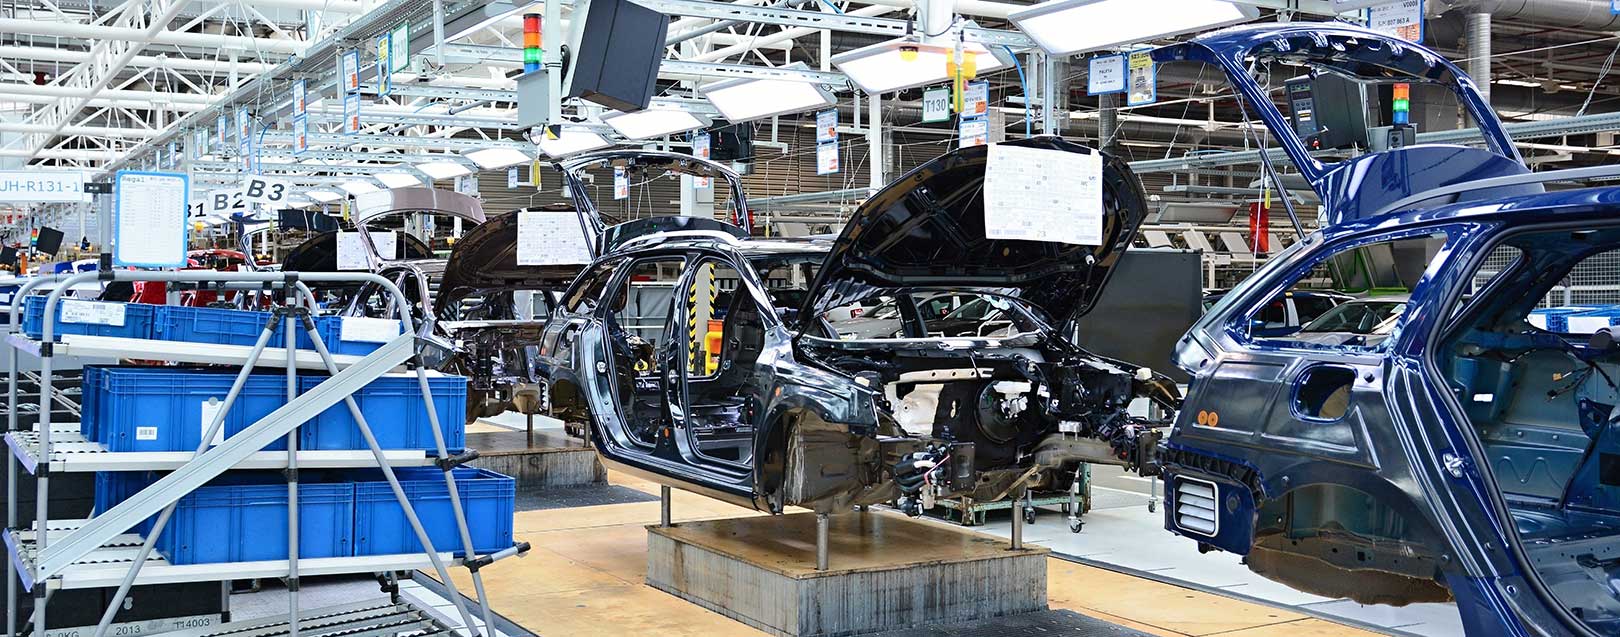 India has good scope of global trade in auto components